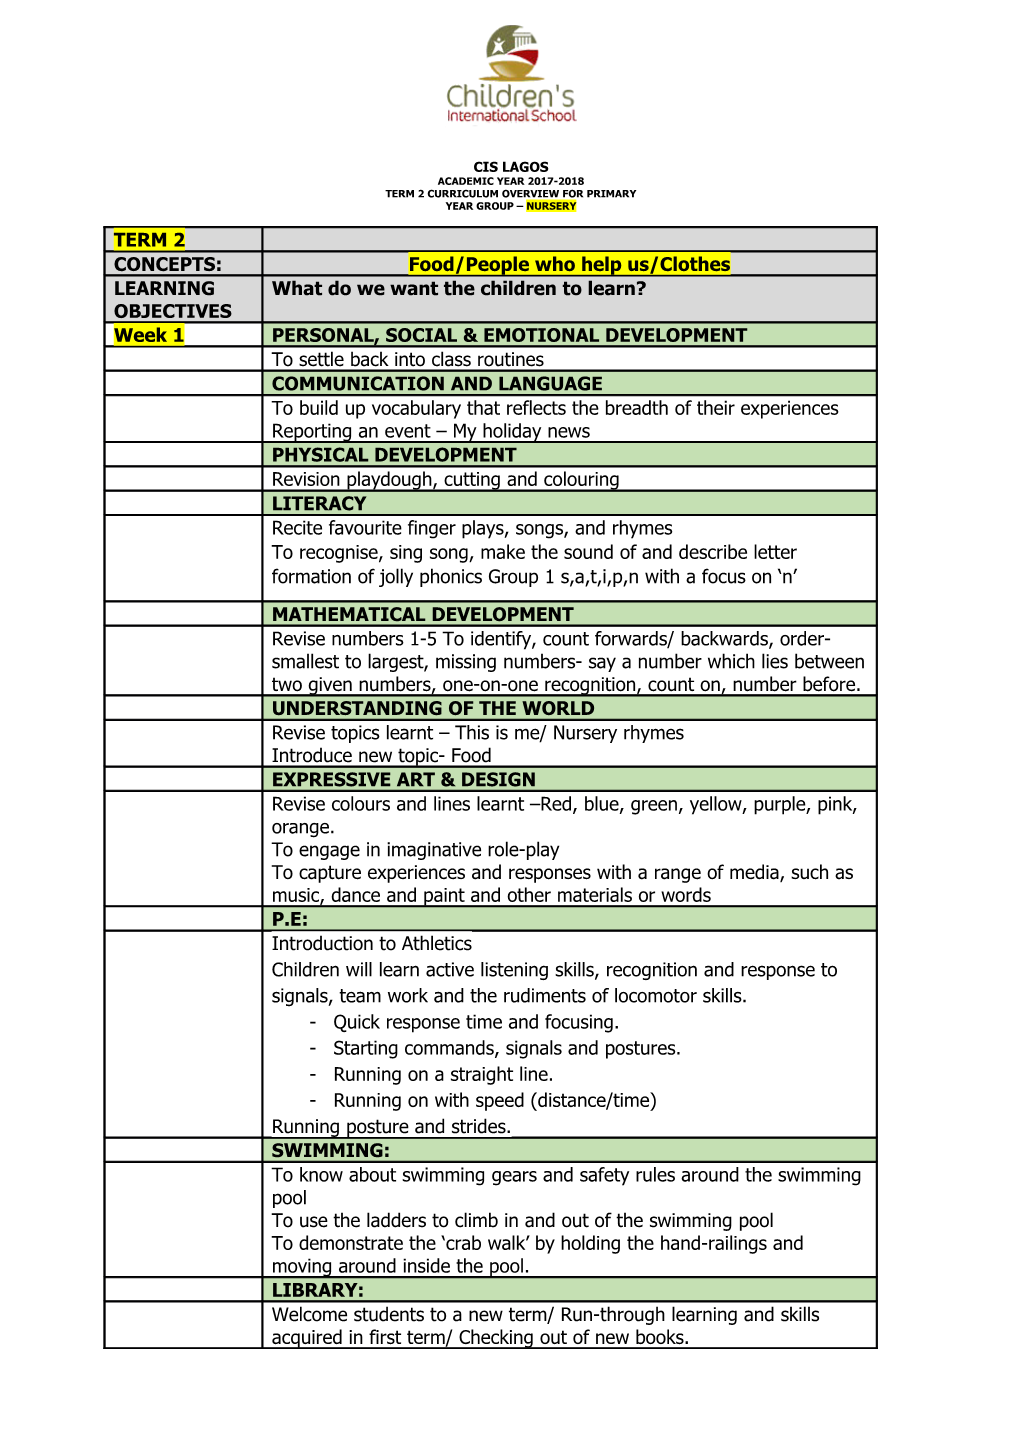 Term 2 Curriculum Overview for Primary